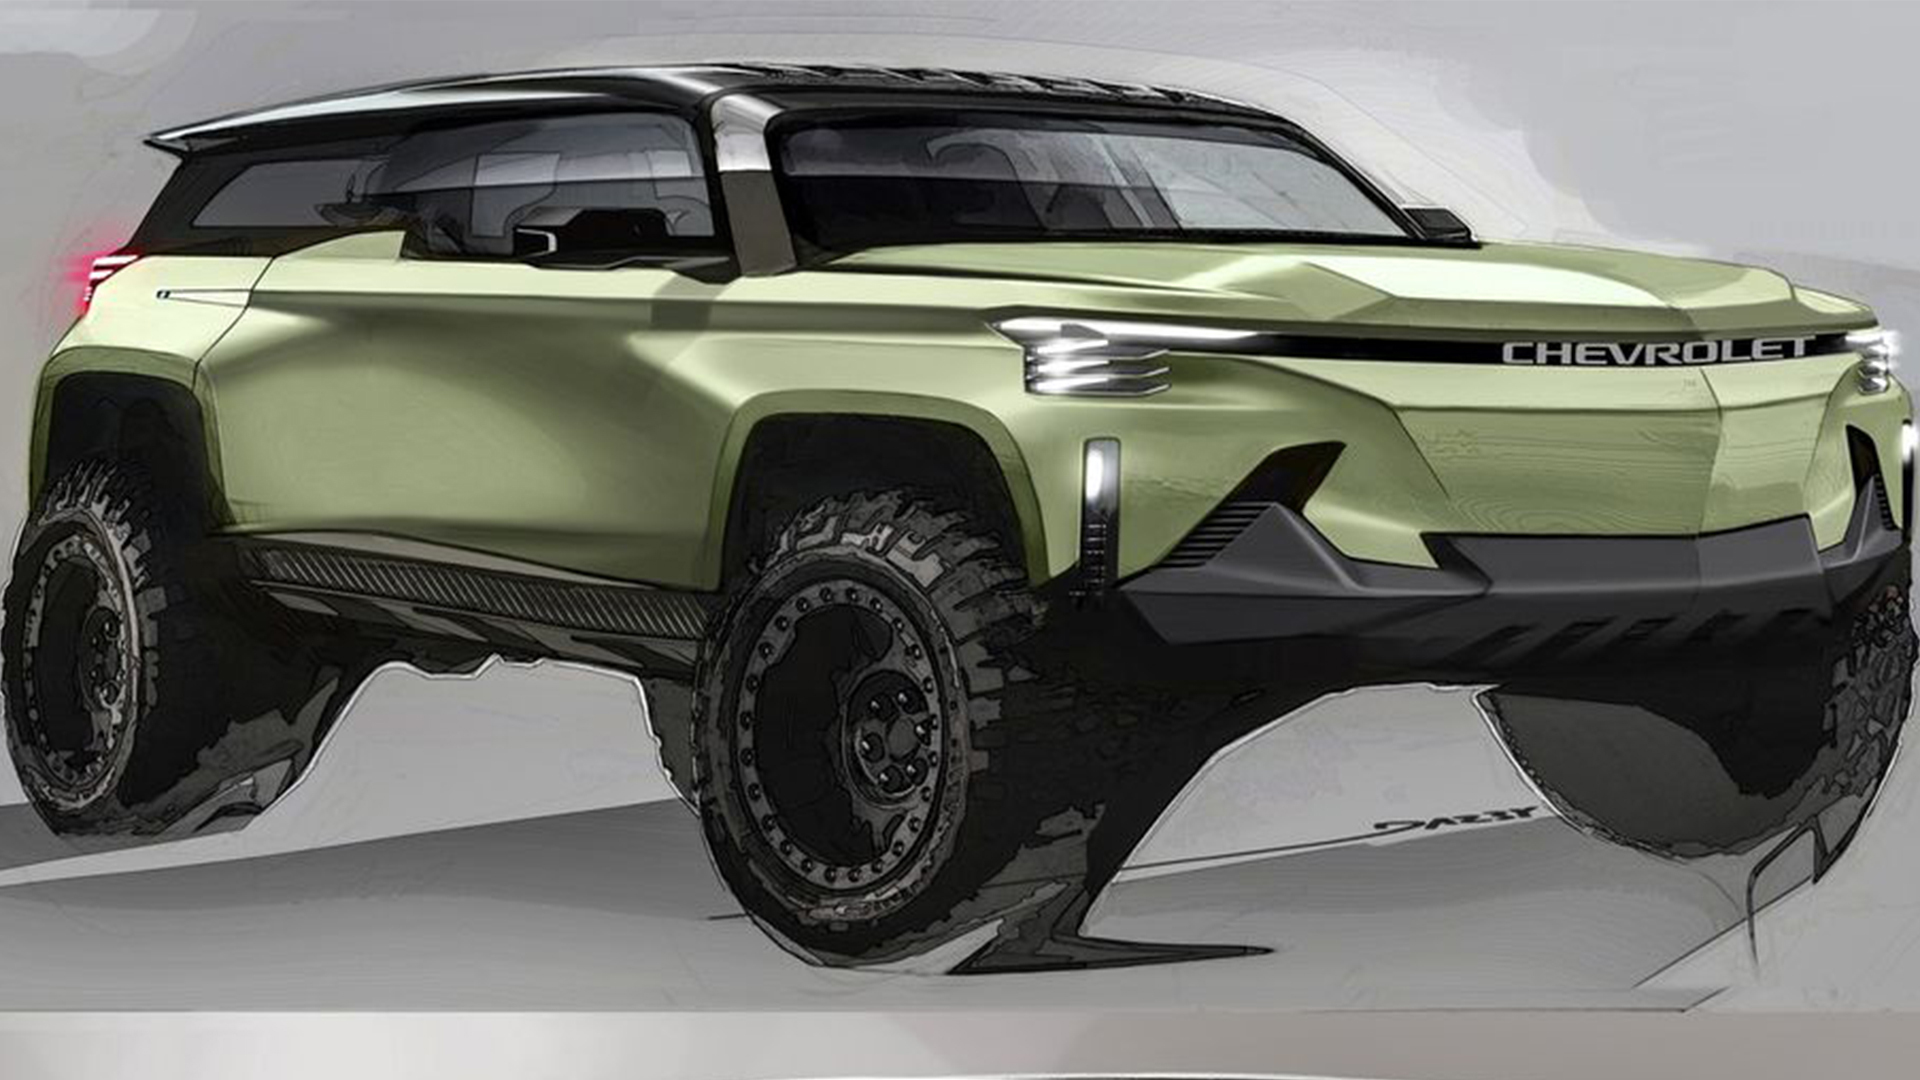 Would You Buy A Modern Chevy K5 Blazer That Looks Like This?